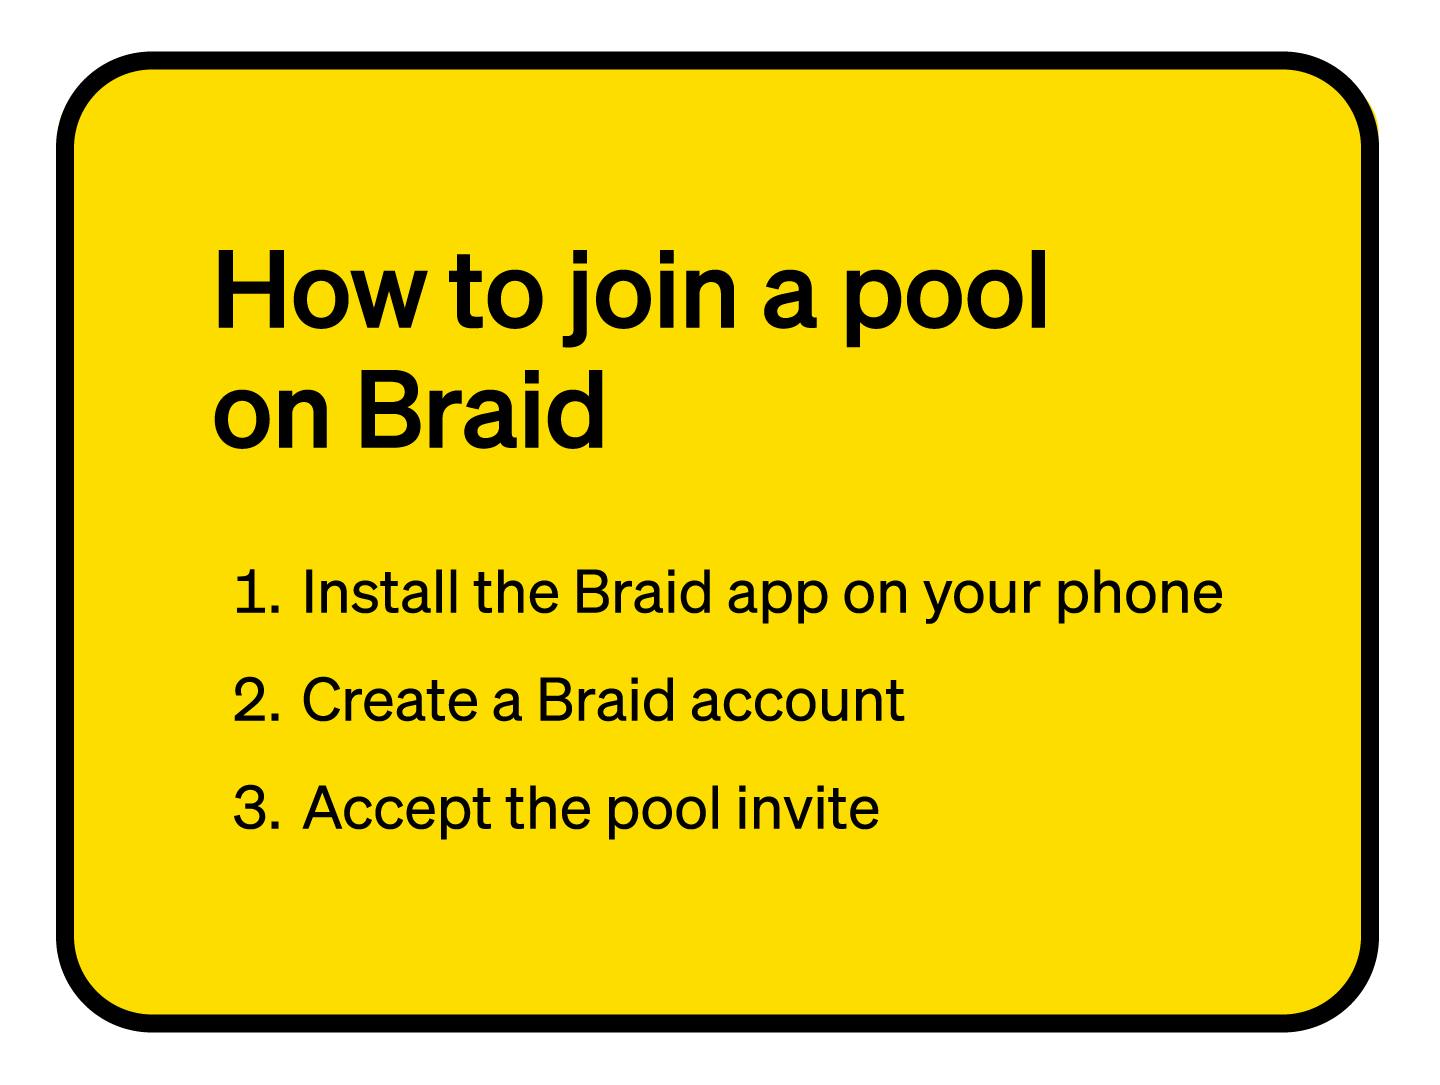 Instructions on how to join a pool on Braid